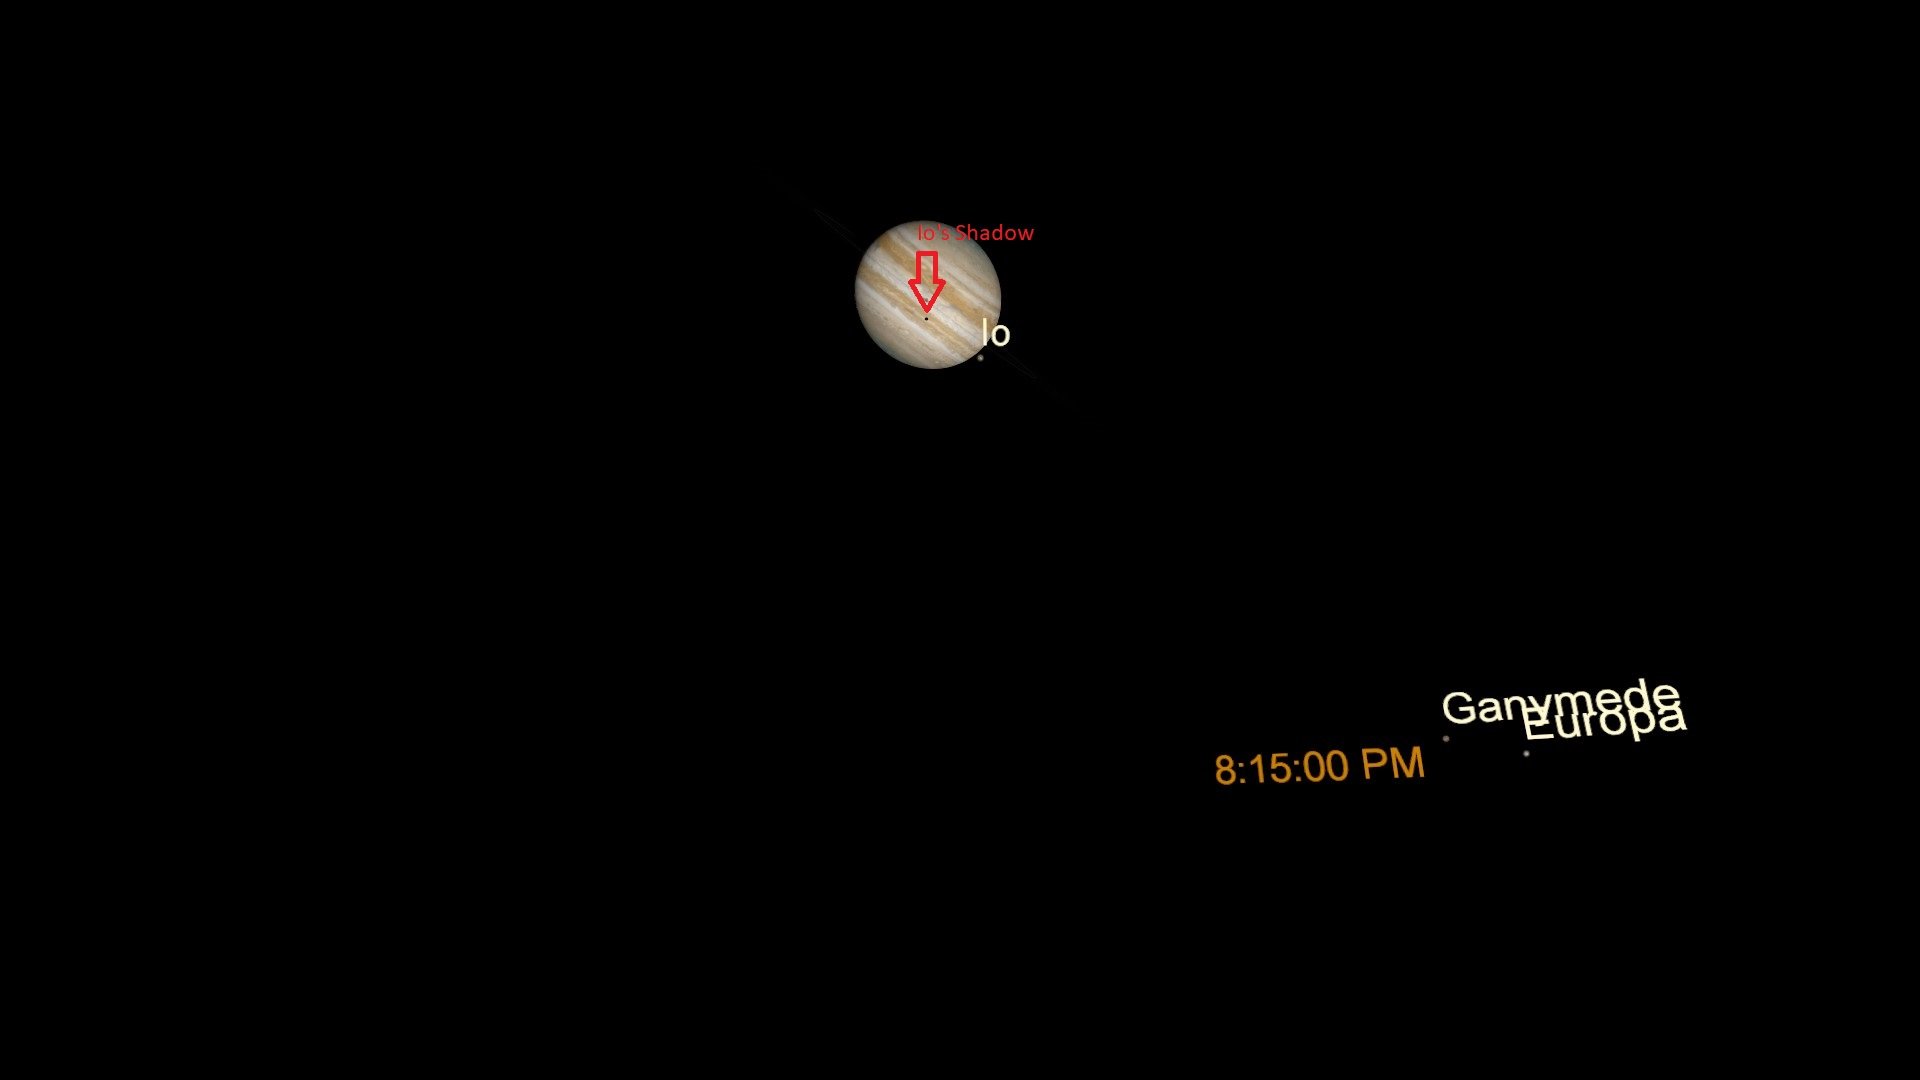 Jupiter and three of its moons seen through a telescope. A red arrow points to the tiny black dot of Io's shadow near the middle of the planet disc.